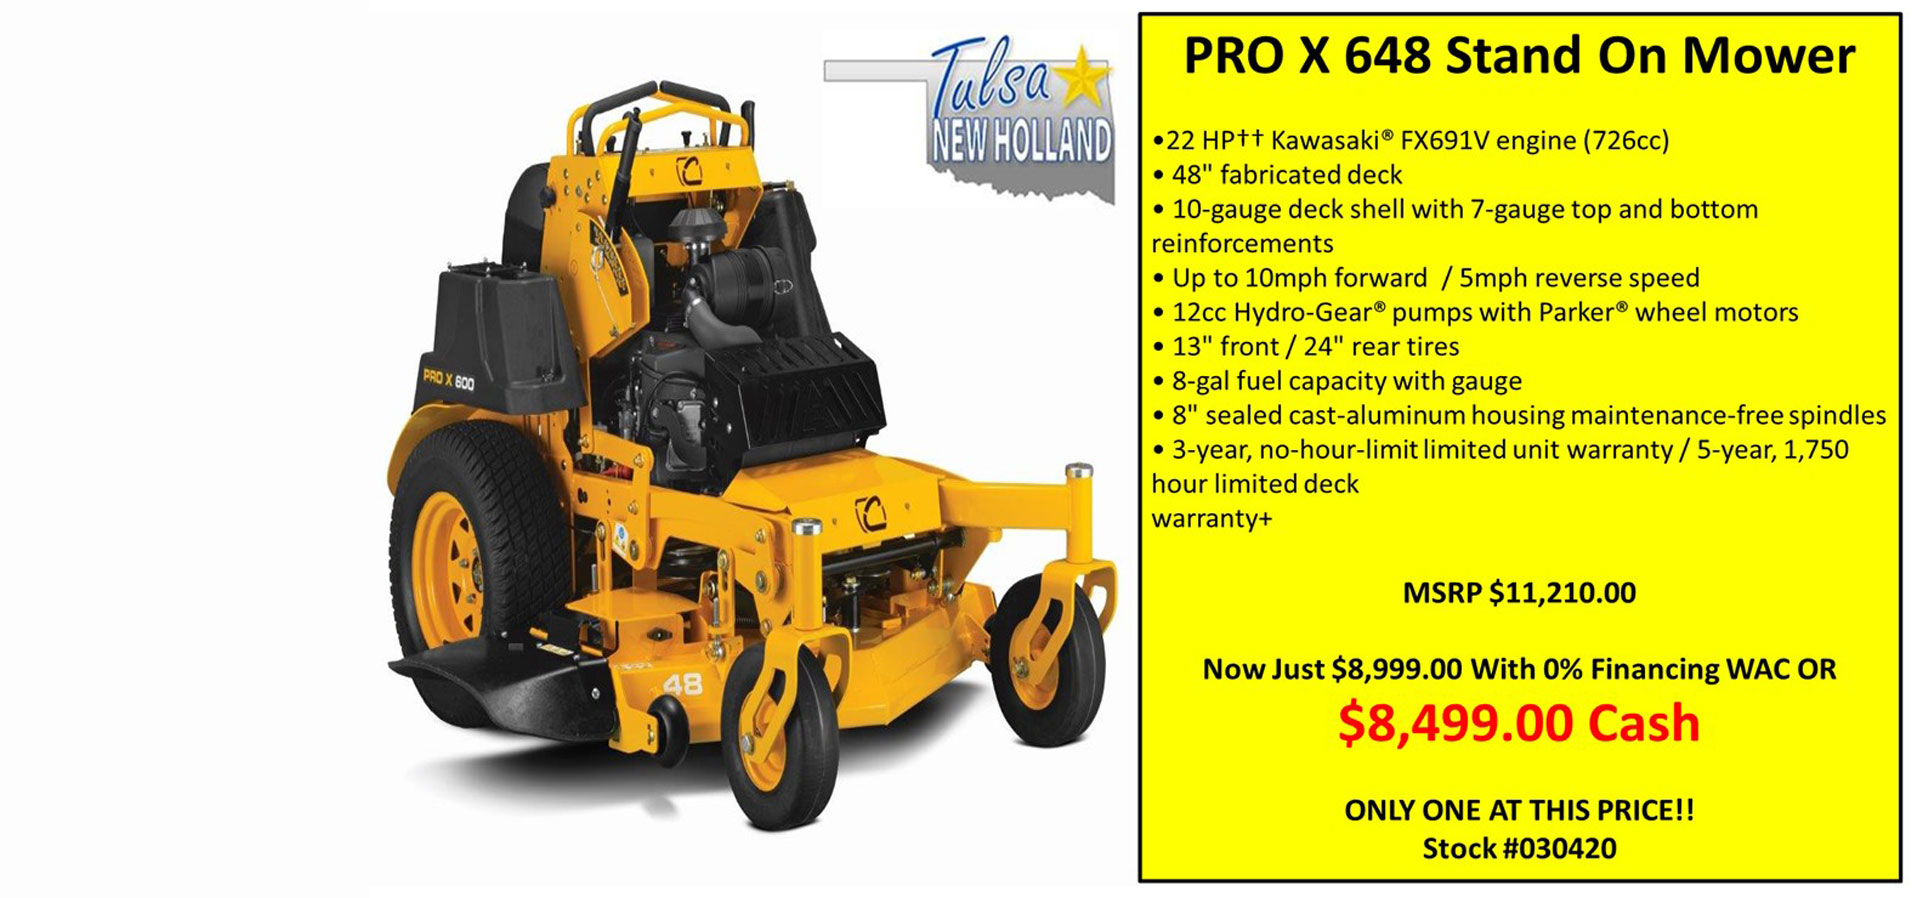 Tulsa New Holland, INC - PRO X 648 Stand On Mower - Special Financing And Cash Price Offer